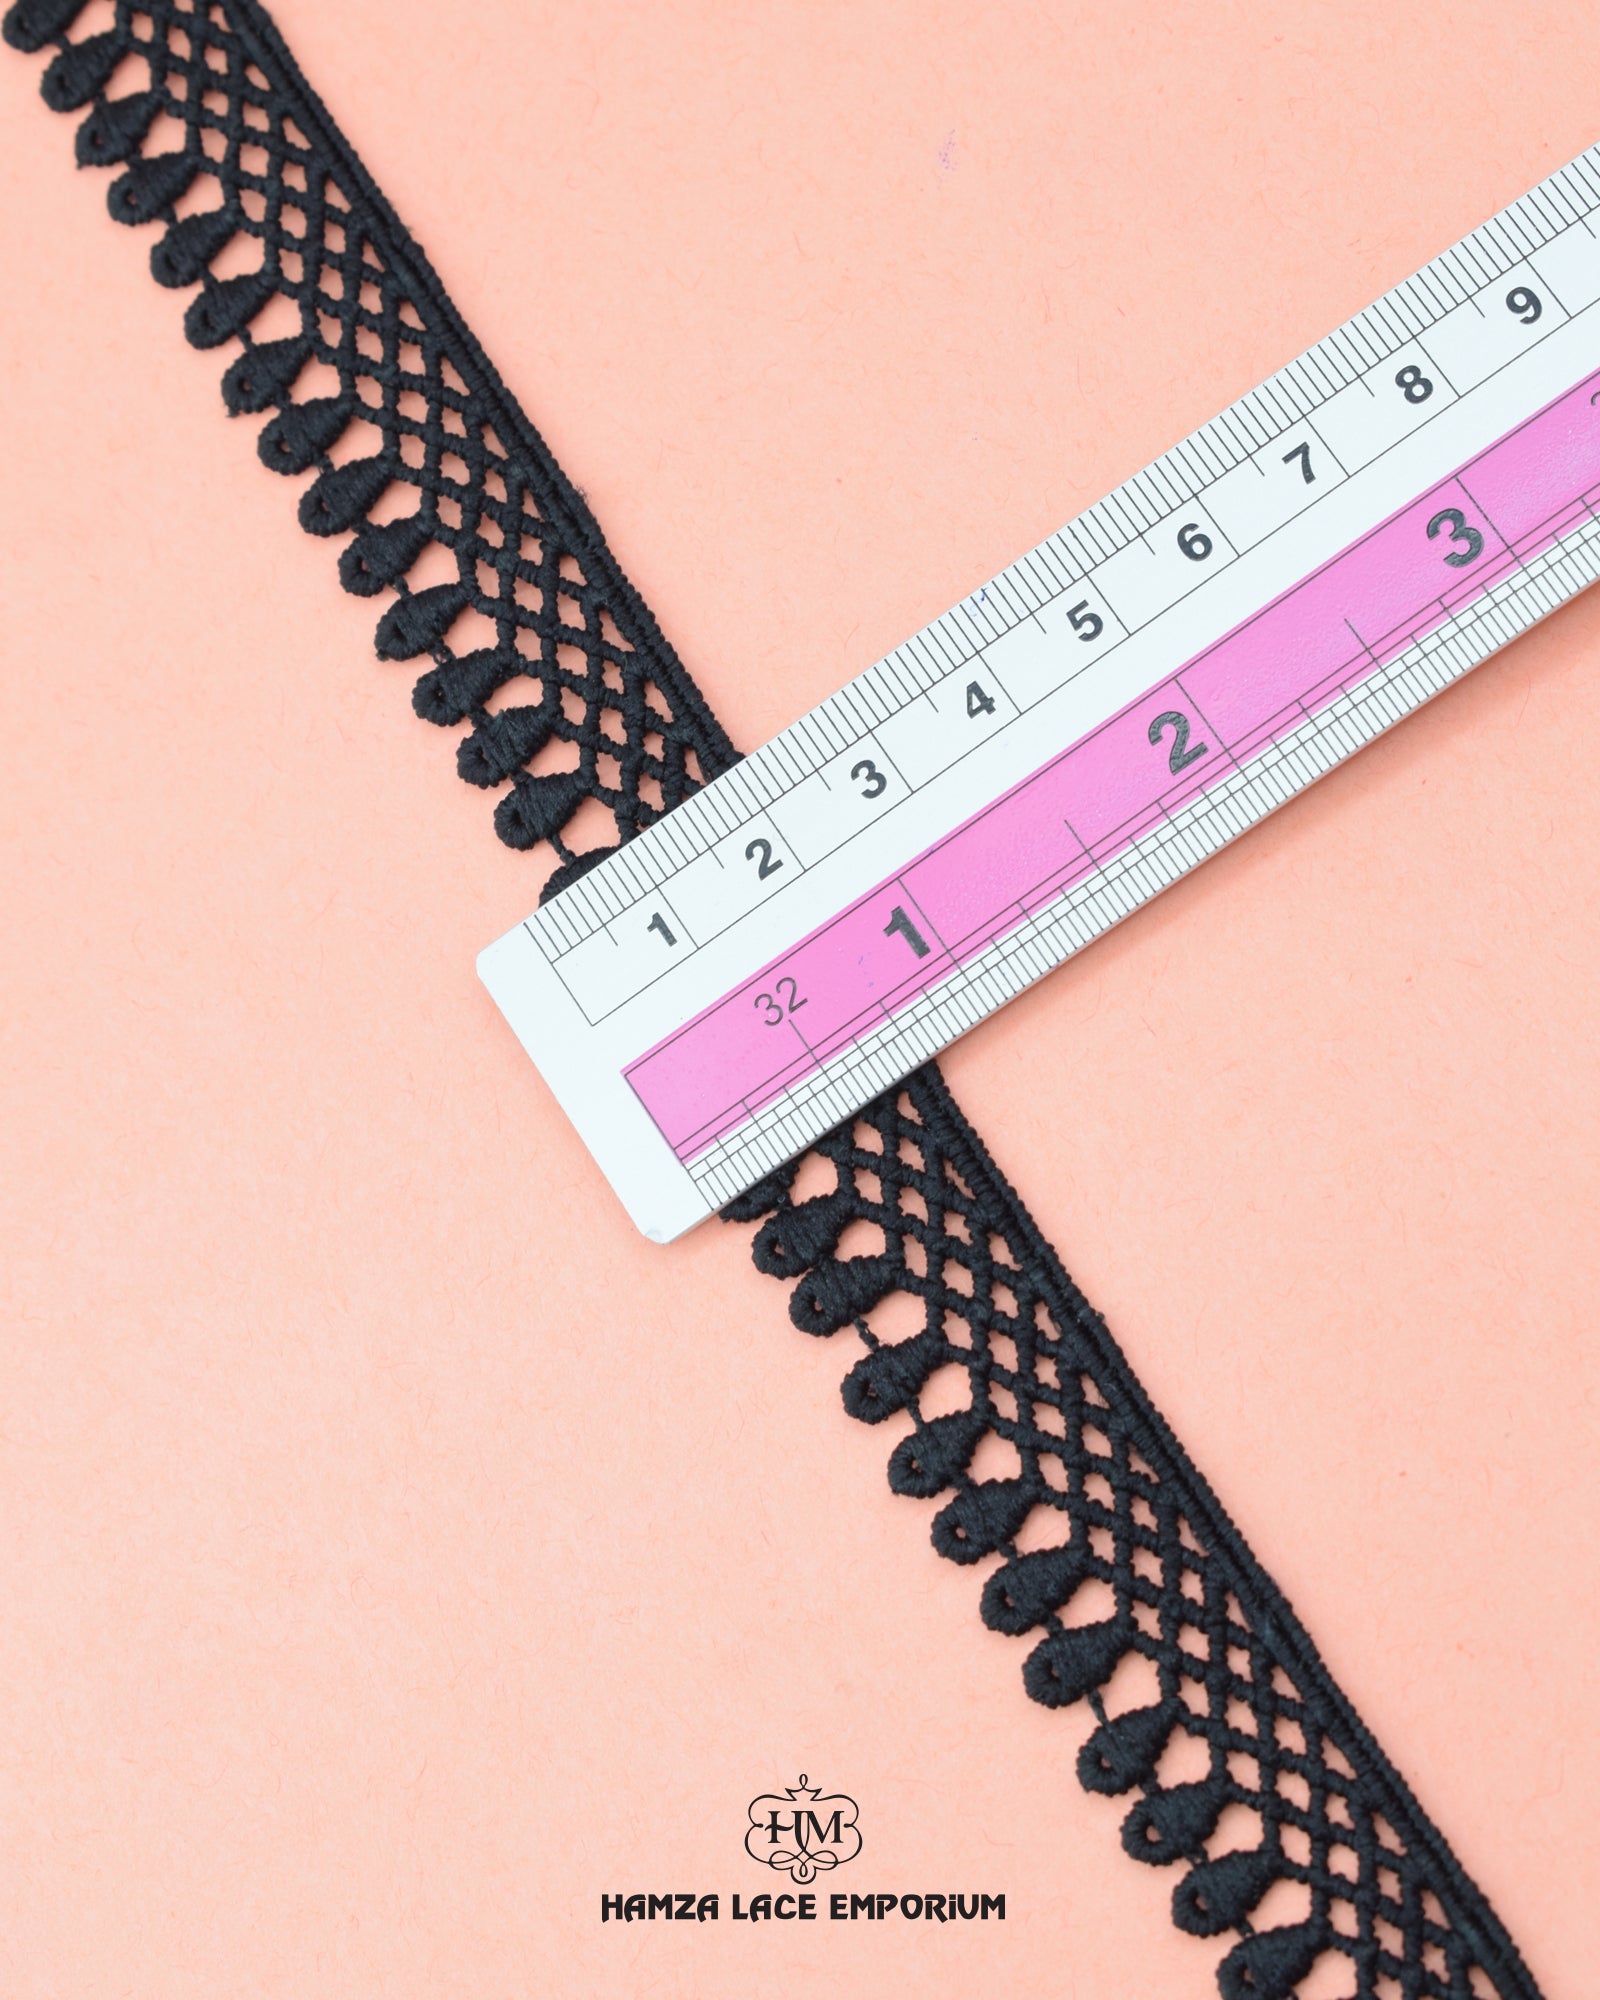 Using a scale, the size of 'Edging Loop Lace 22629' is shown